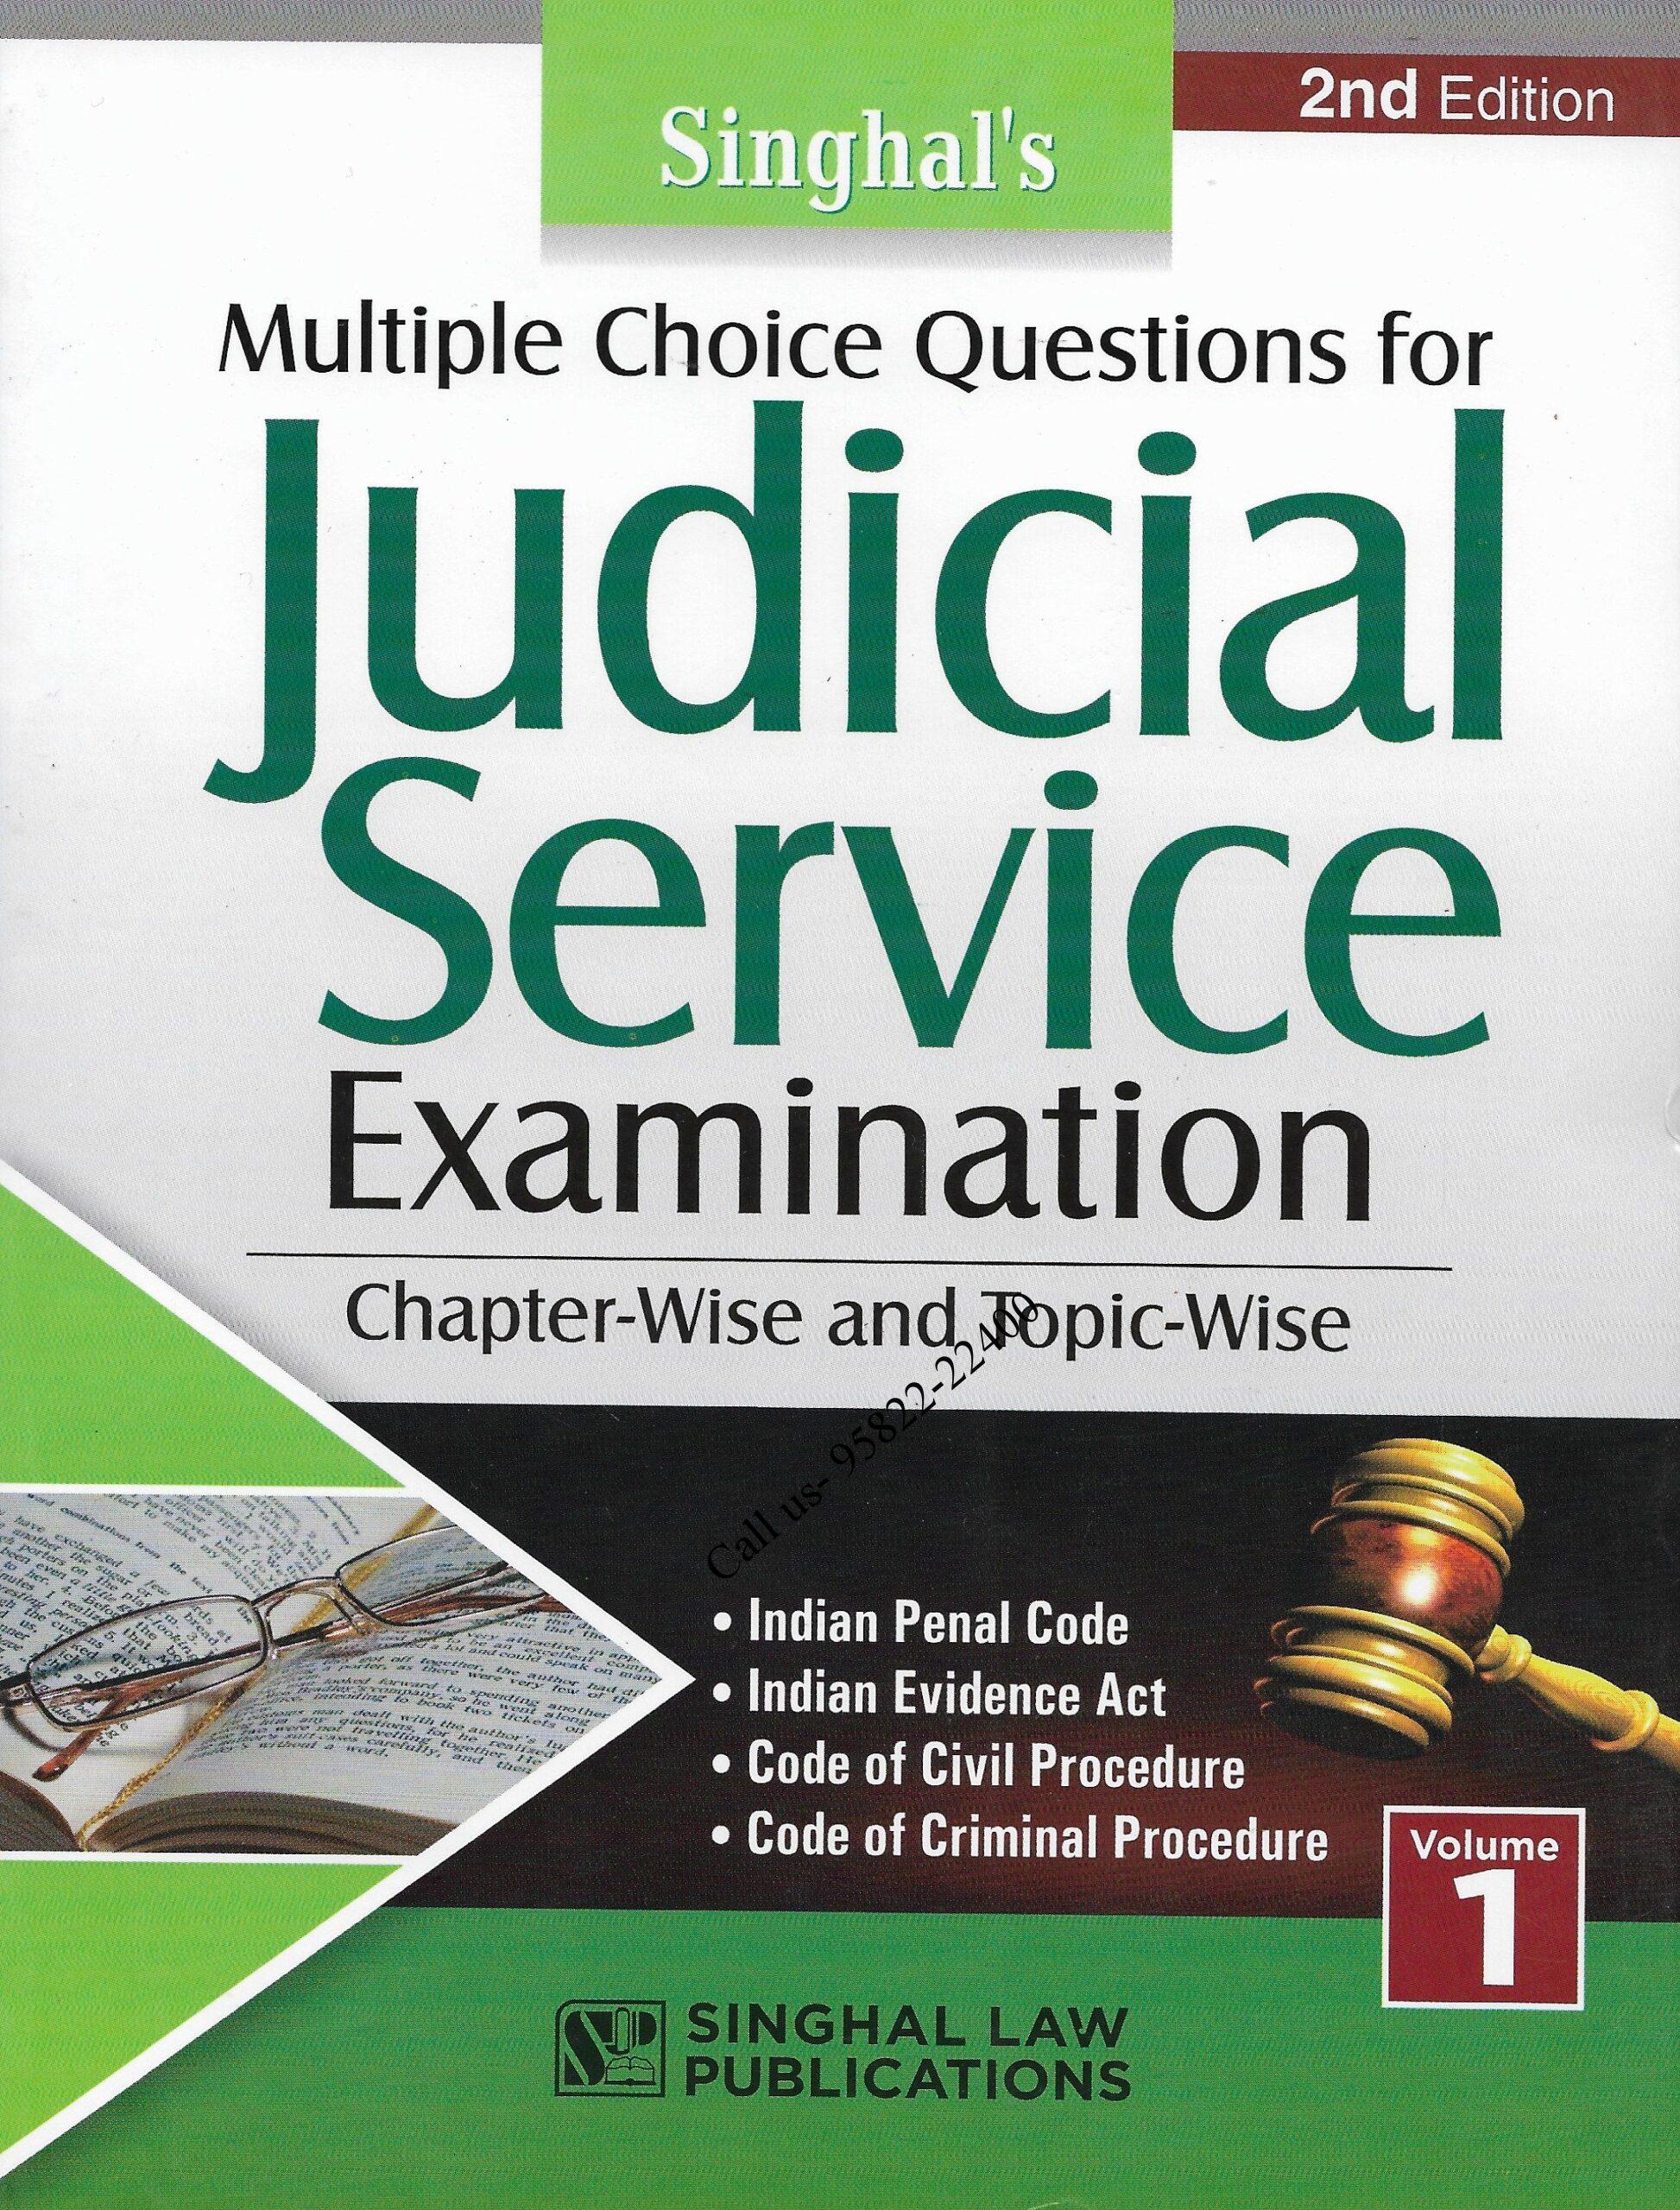 Singhal's Multiple Choice Questions for JUDICIAL SERVICE EXAMINATION (VOLUME 1)Multiple Choice Questions for JUDICIAL SERVICE EXAMINATION (VOLUME 1) Cover page